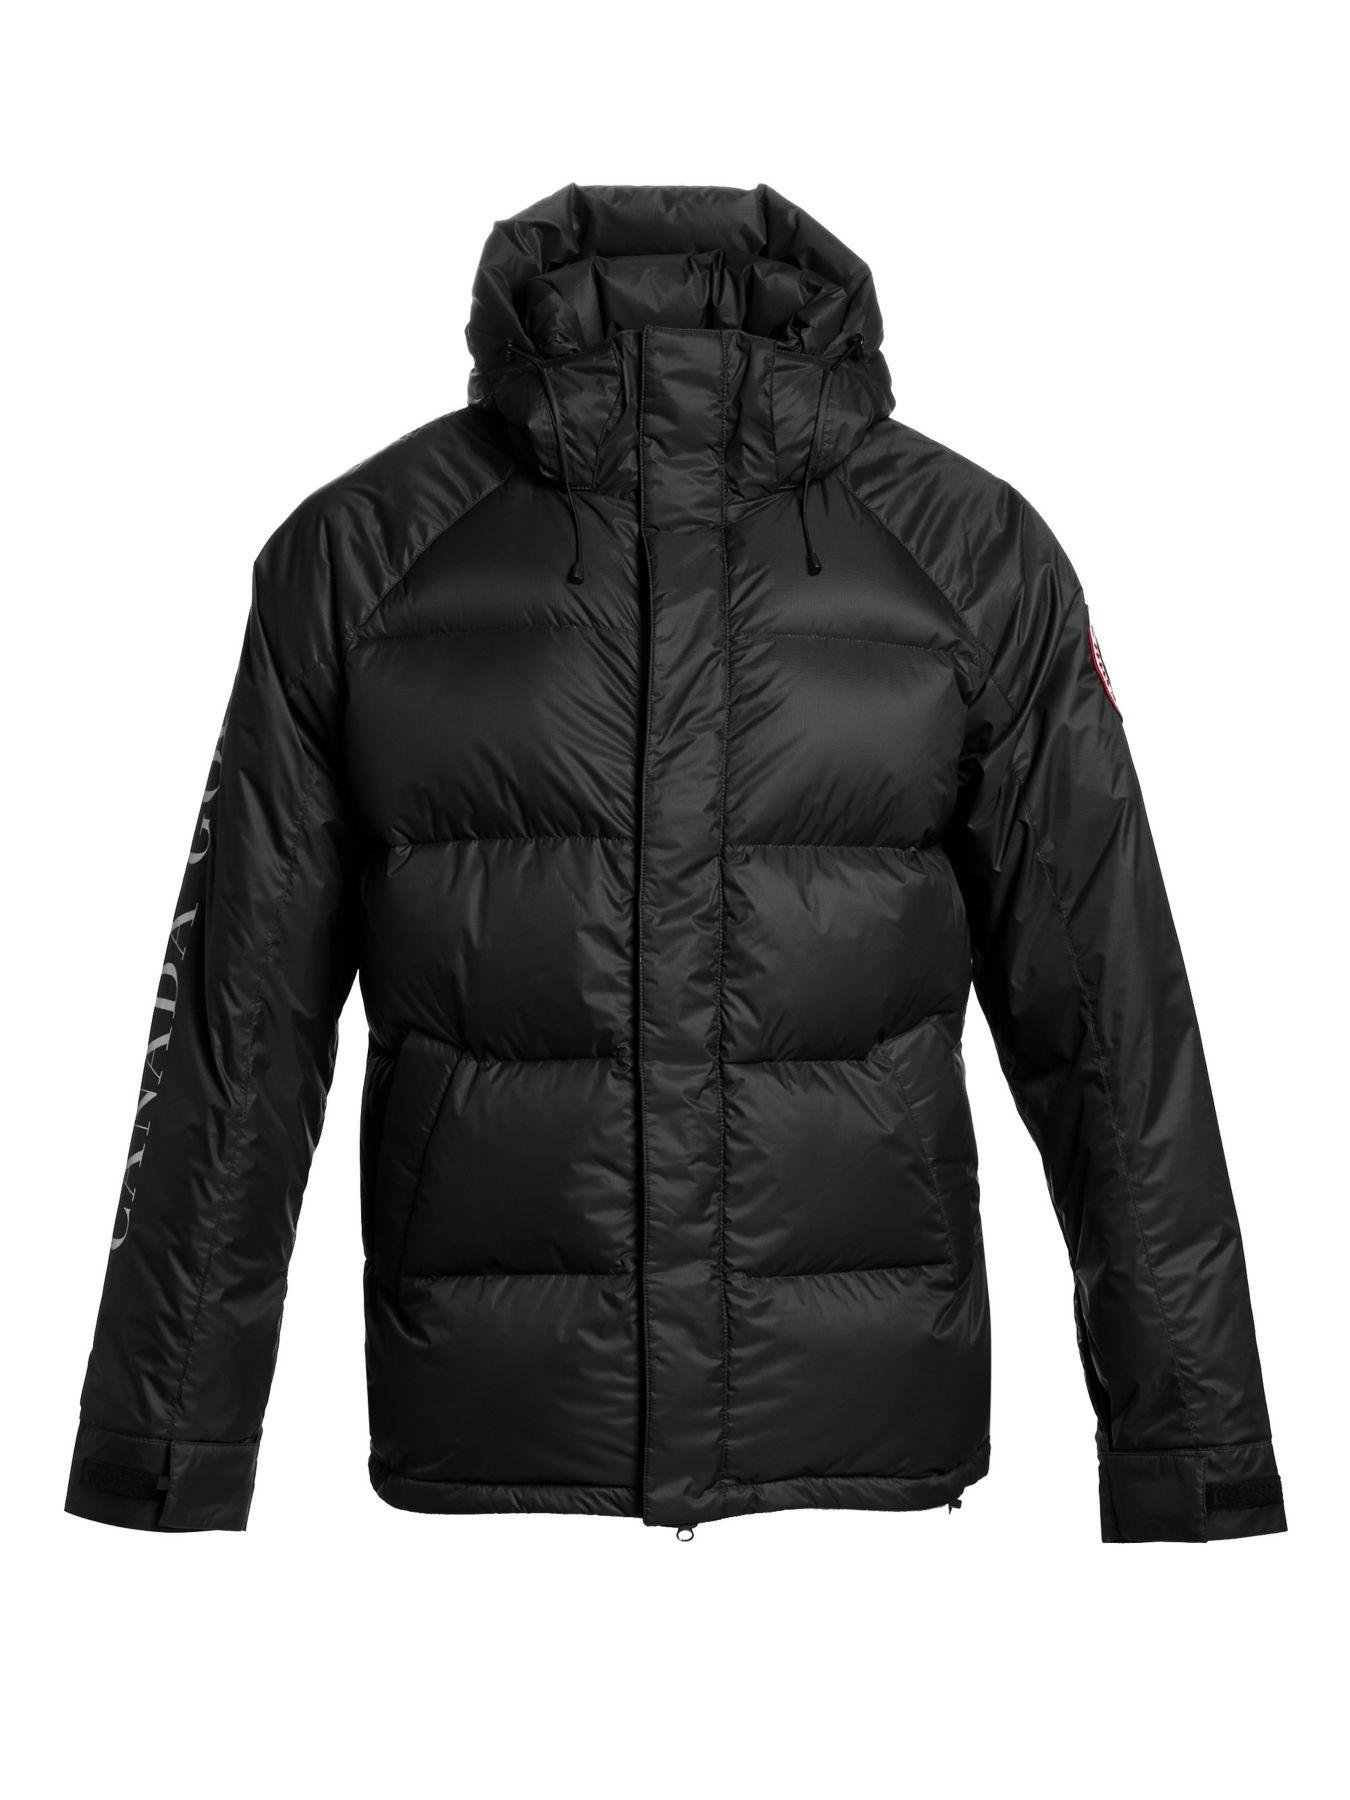 Canada Goose Synthetic Approach Puffer Jacket in Black for Men - Lyst